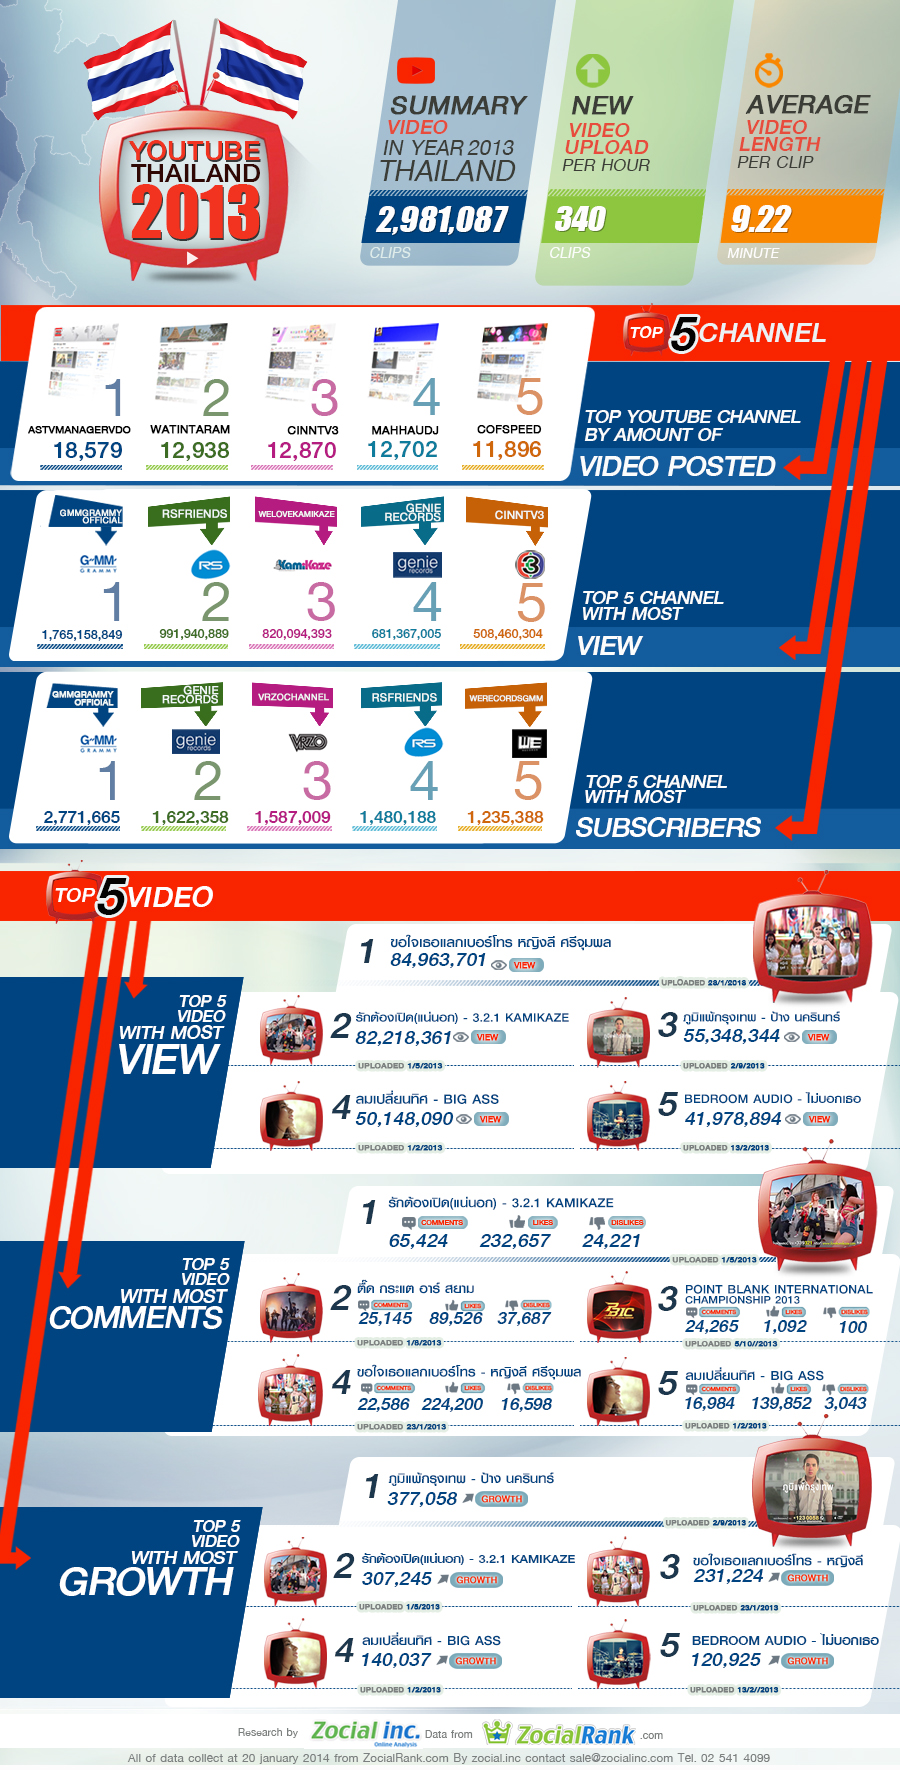 Zocial-Insight-infoGraphic-Mian900-Final-060214